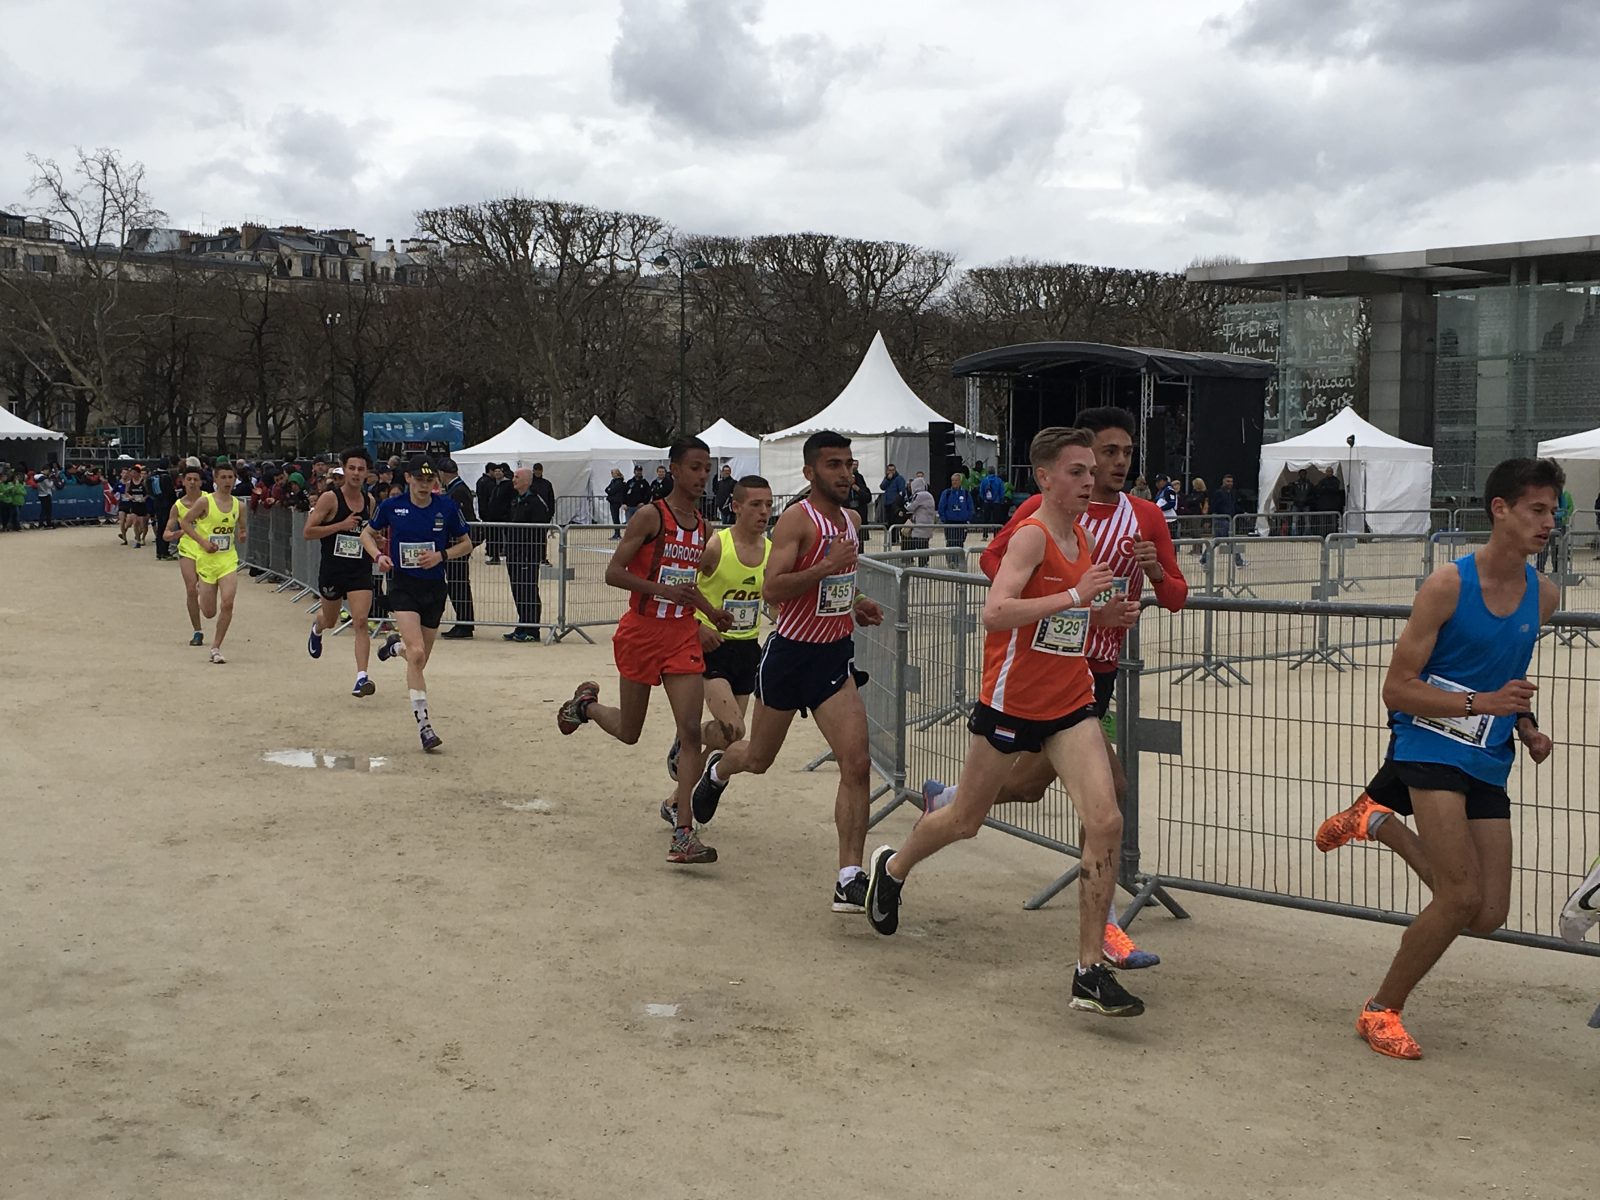 Youth athletes compete at the 2018 International School Sport Federation World School Championship (WSC) Cross Country in Paris on Wednesday 4 April / Photo credit: Yomi Omogbeja